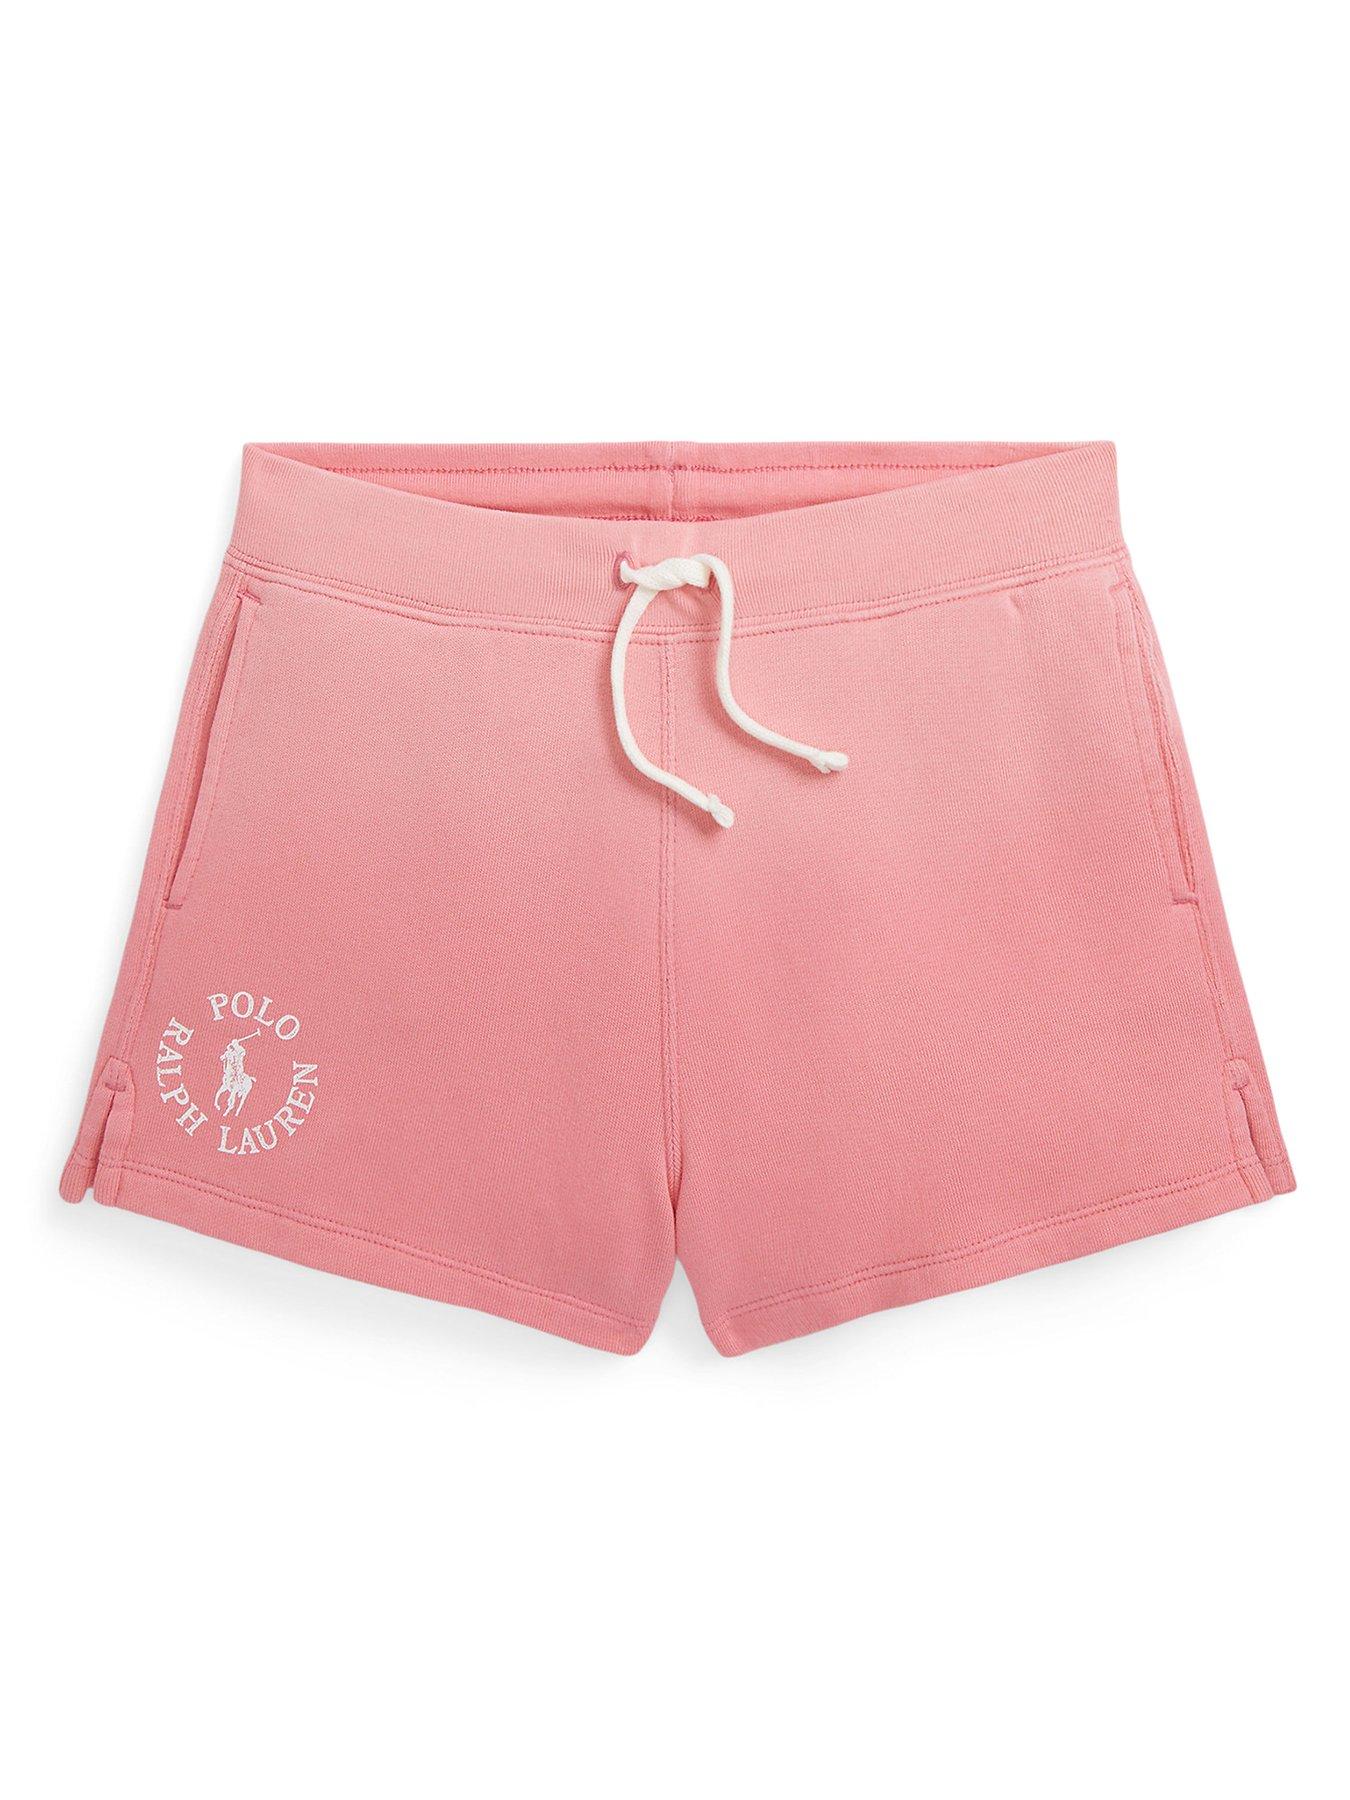 Ralph Lauren Girls Polo Graphic Joggers - Bright Pink